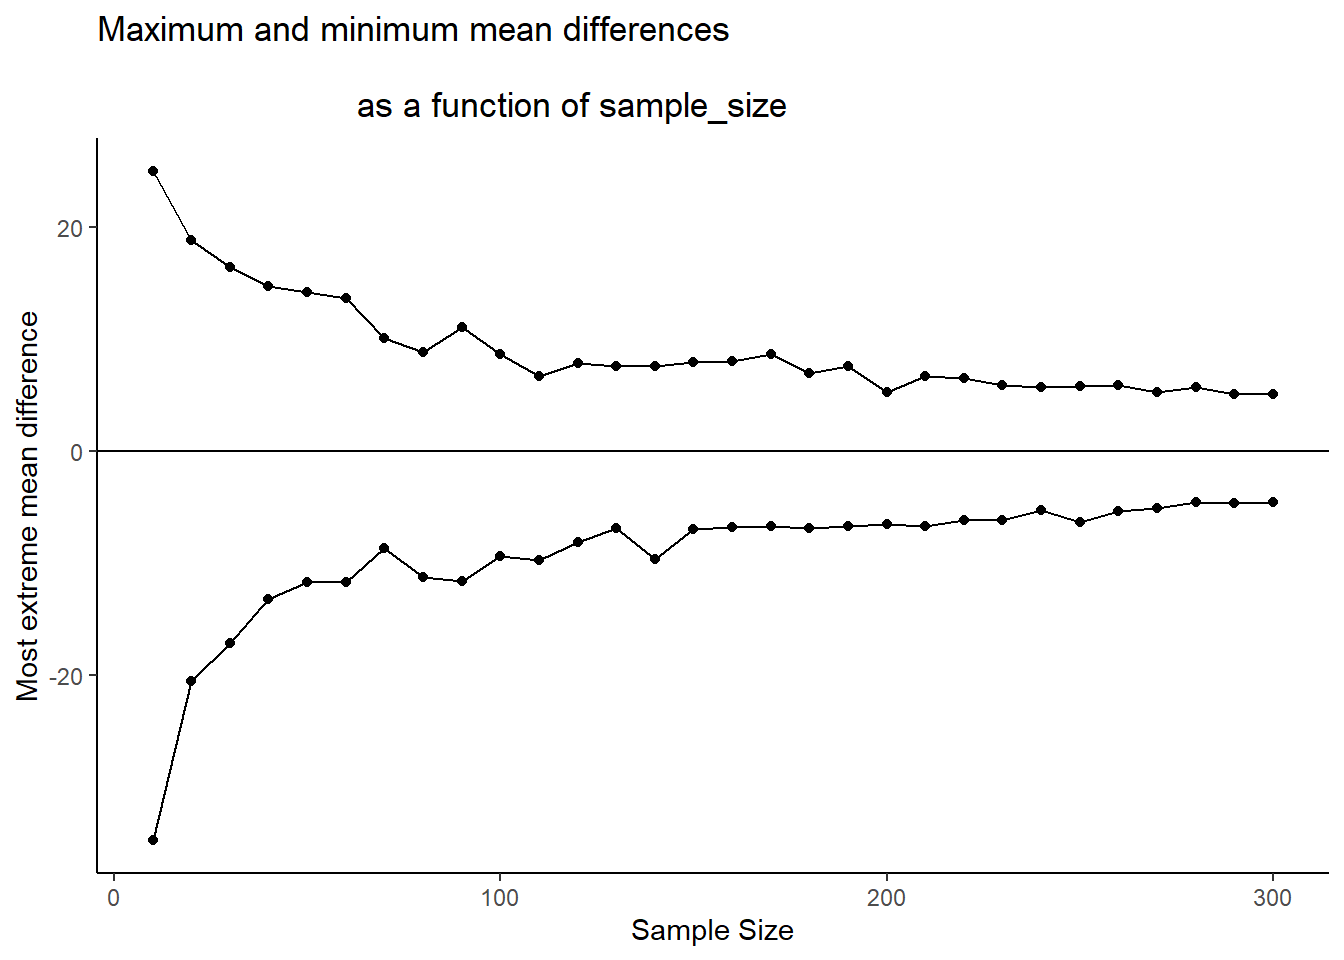 A graph of the maximum and minimum mean differences produced by chance as a function of sample-size. The range narrows as sample-size increases showing that chance alone produces a smaller range of mean differences as sample-size increases